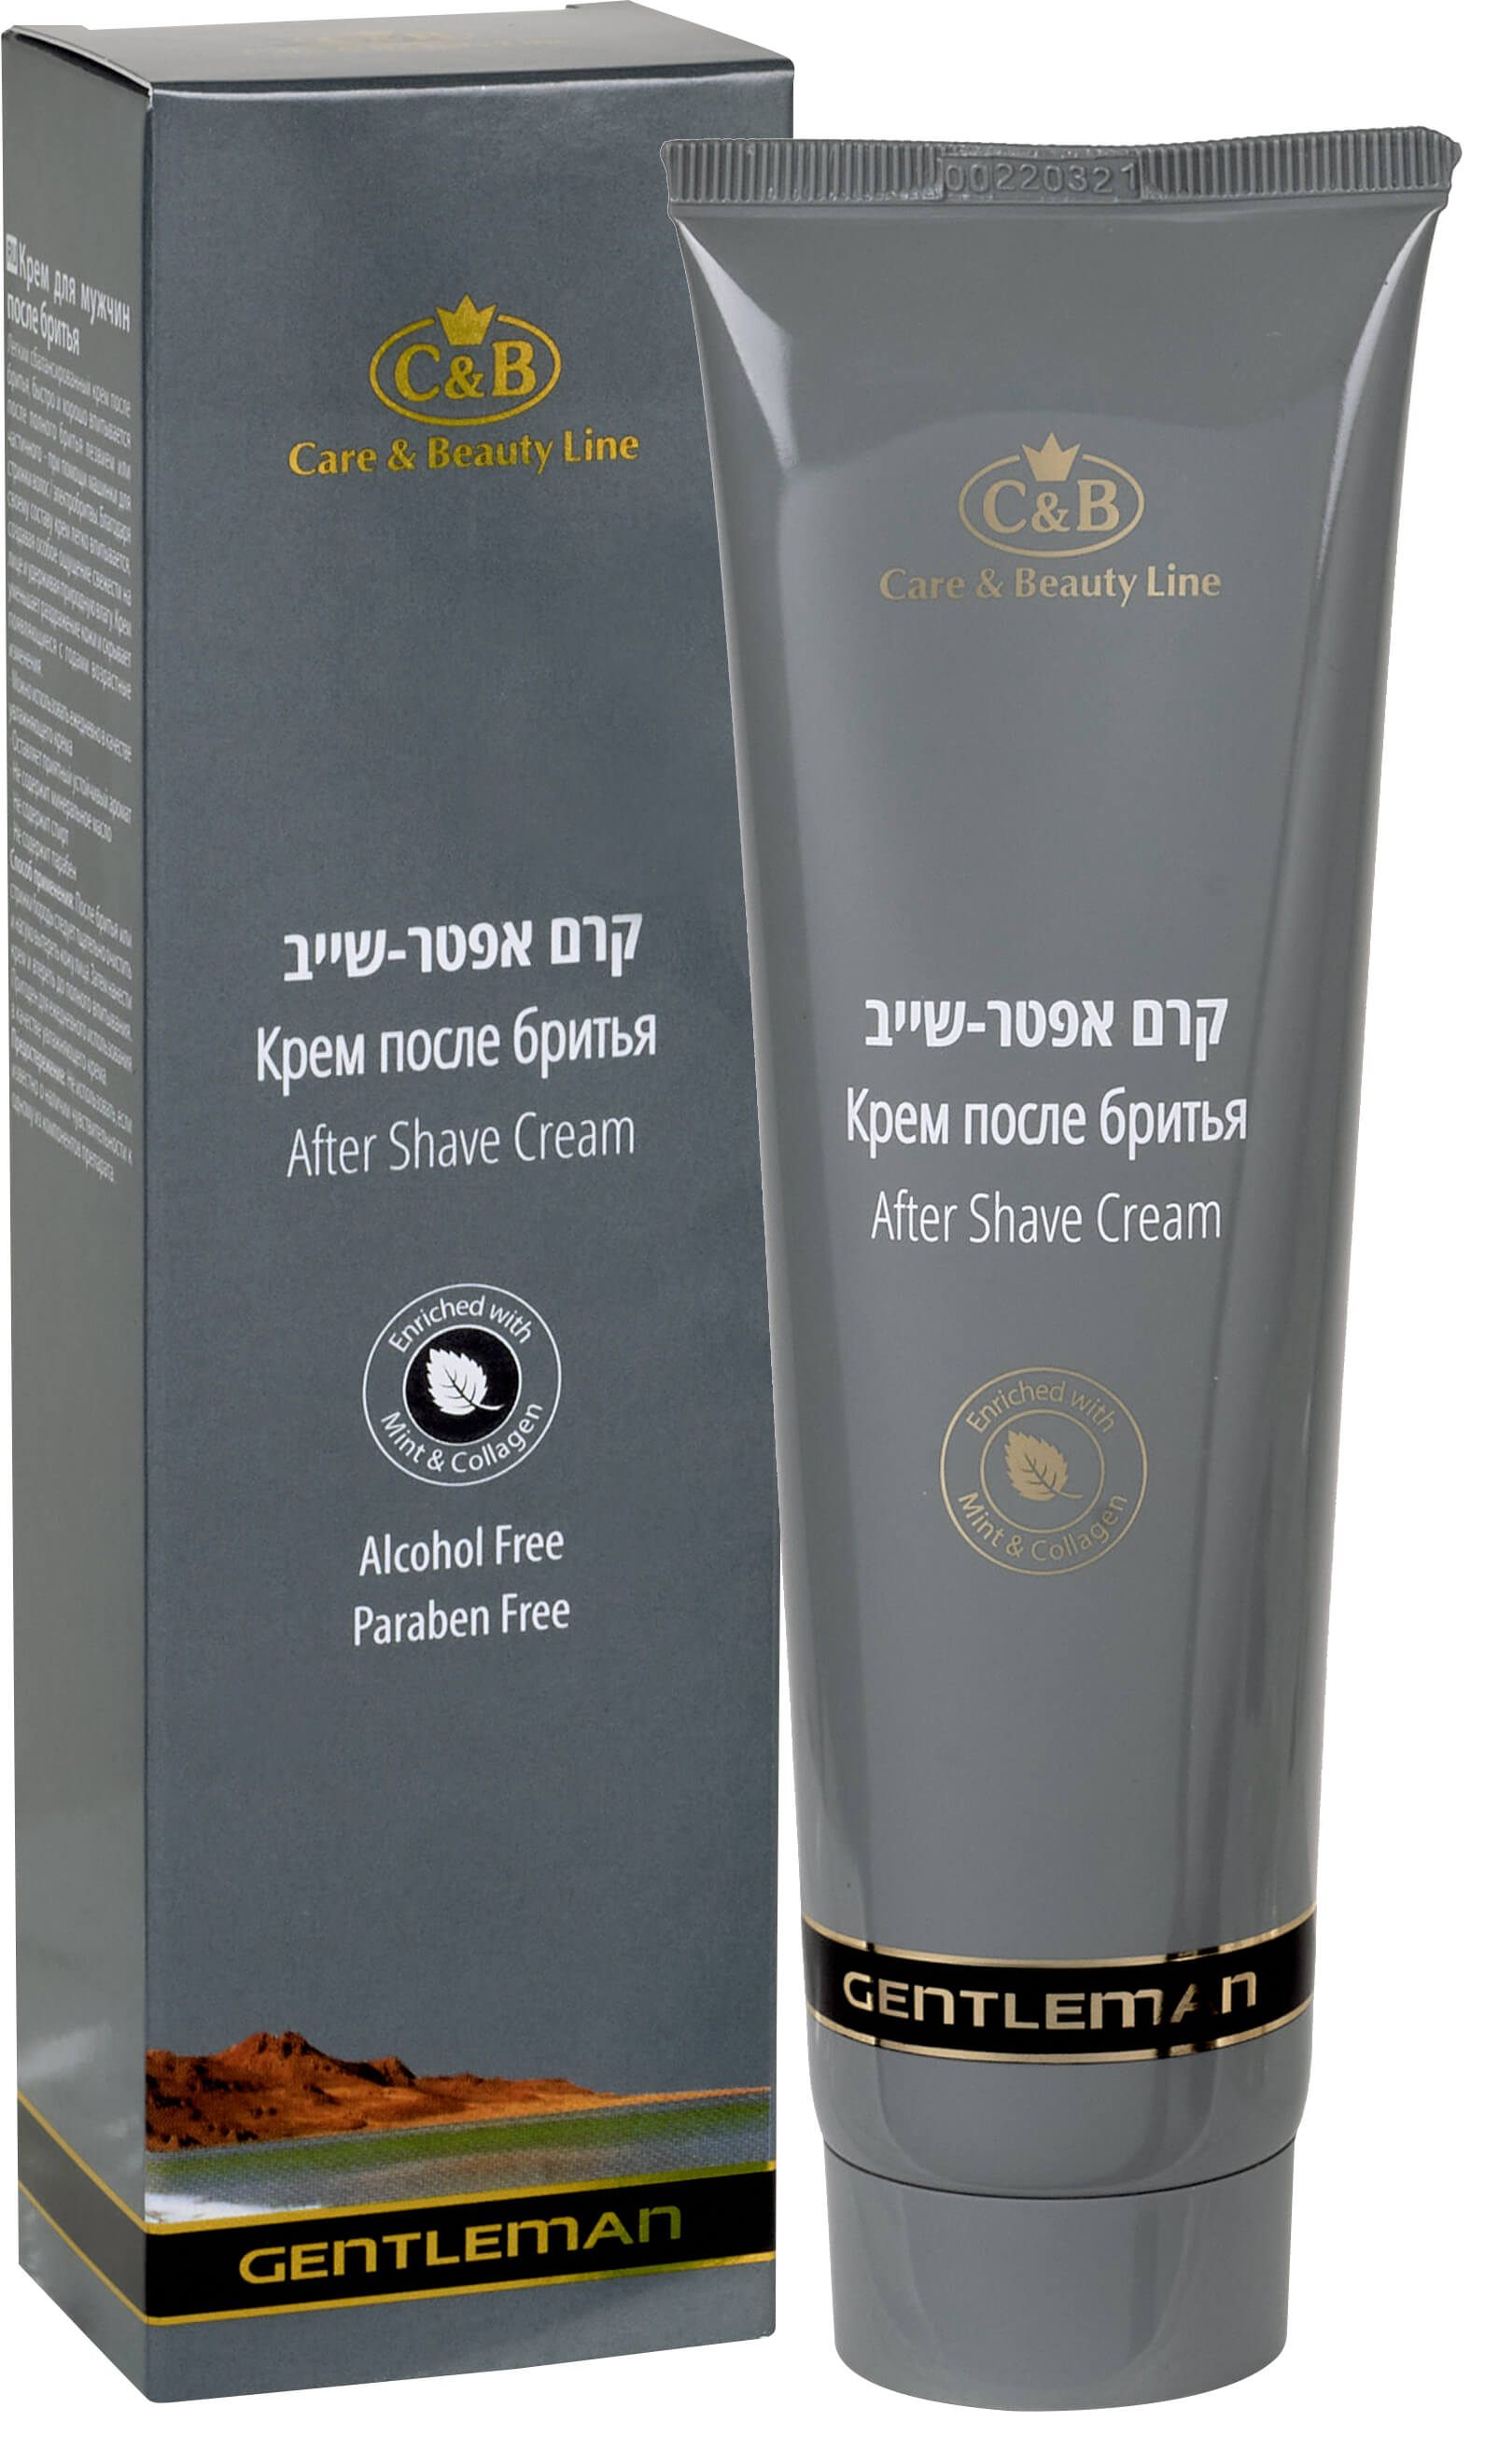 After shave moisturizer with mint and collagen